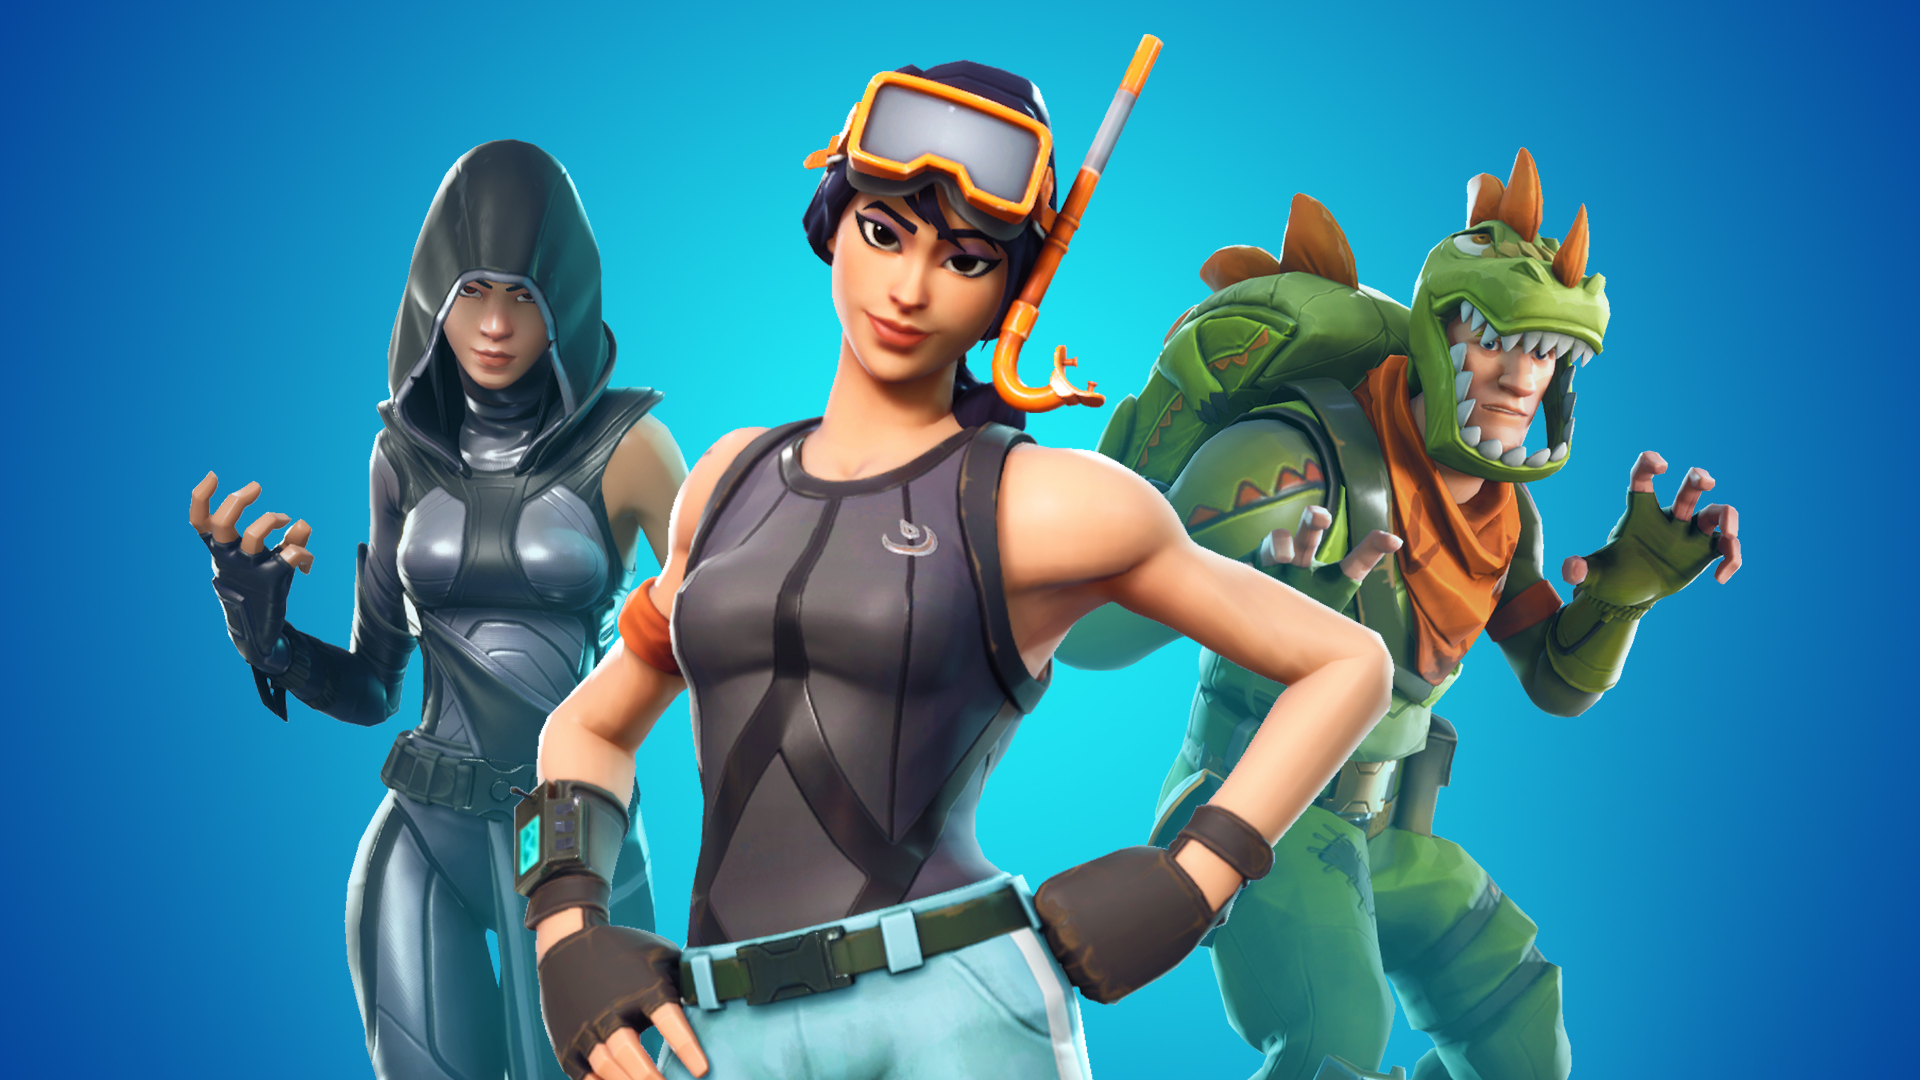 Sony finally allows Fortnite between PS4, PC, Xbox, | PC Gamer